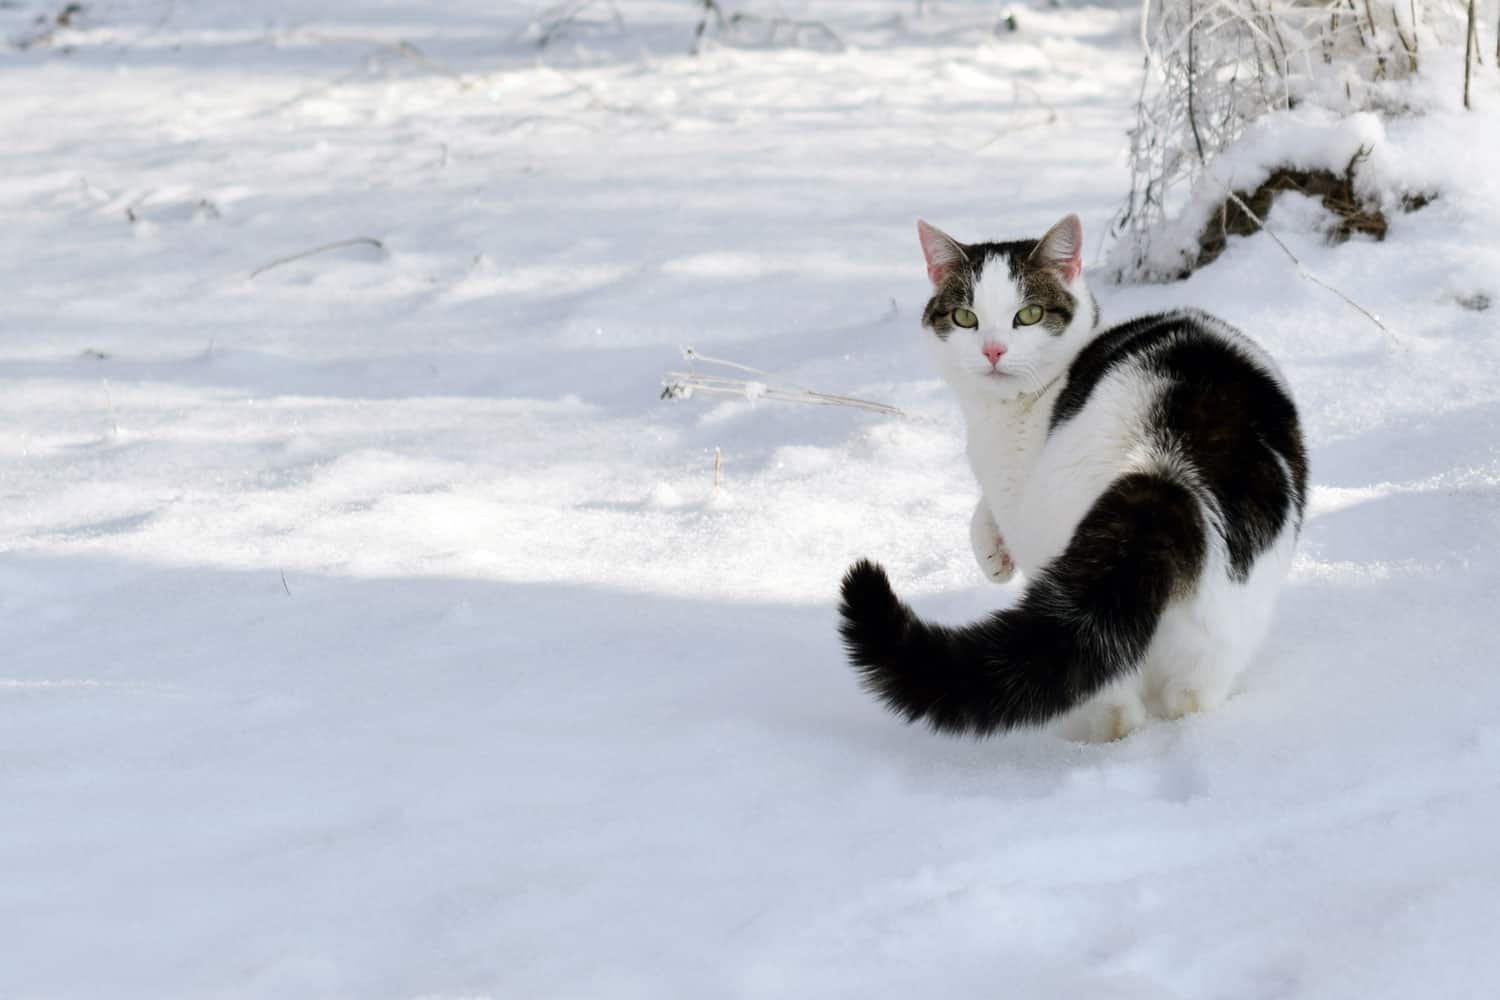 Cat with puffy tail in the snow and looking at camera.
